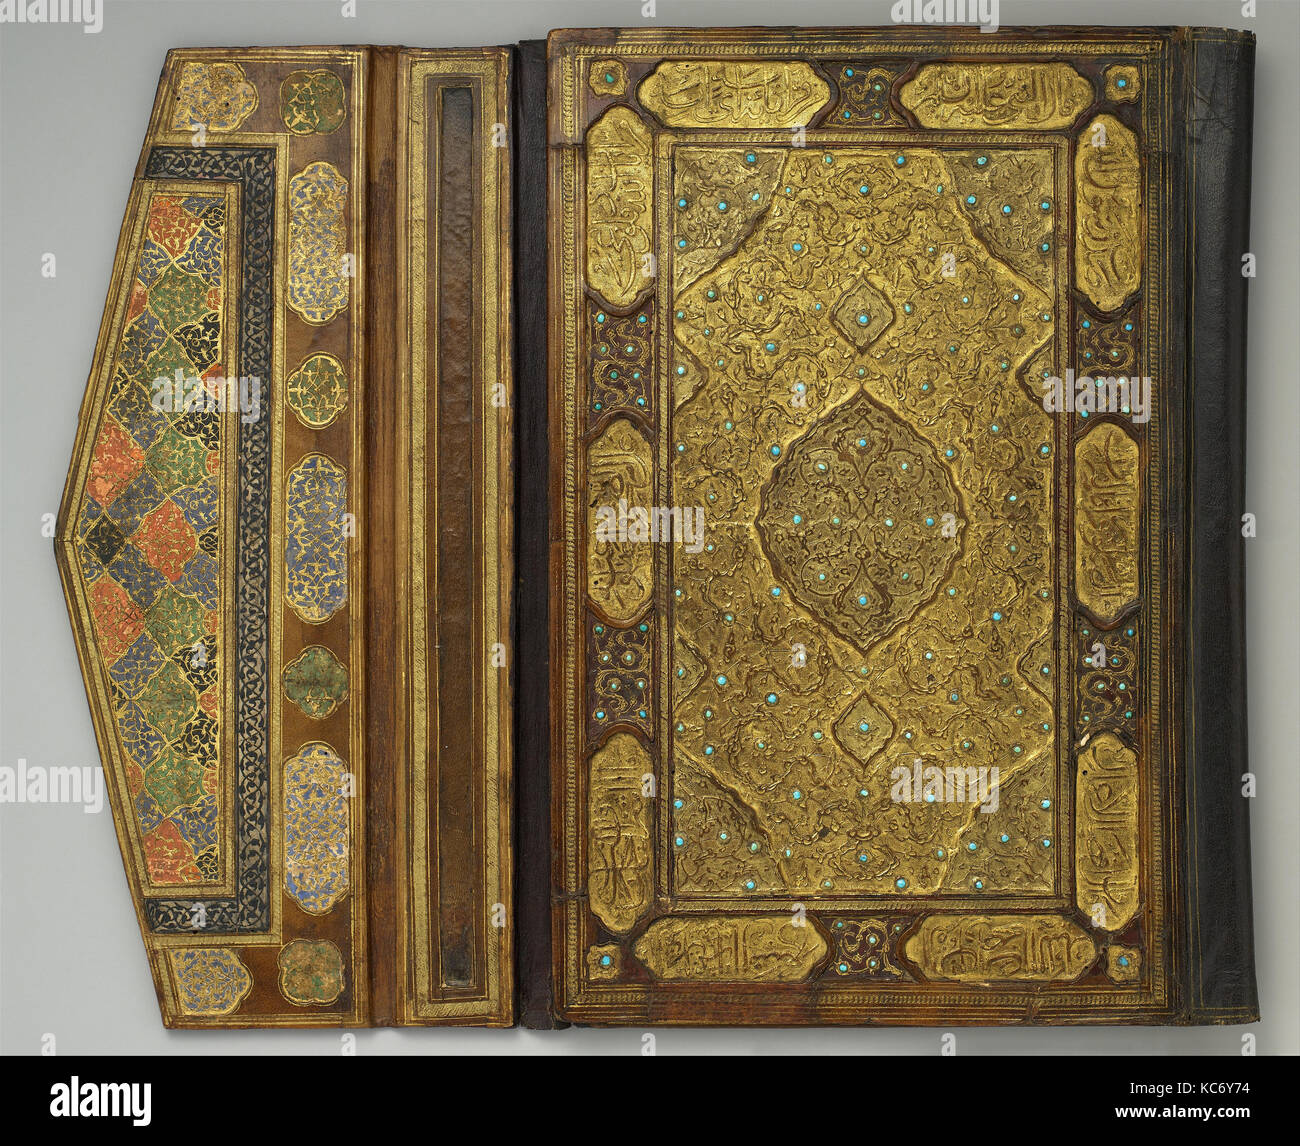 Qur'an Bookbinding Inset with Turquoise, 16th century Stock Photo